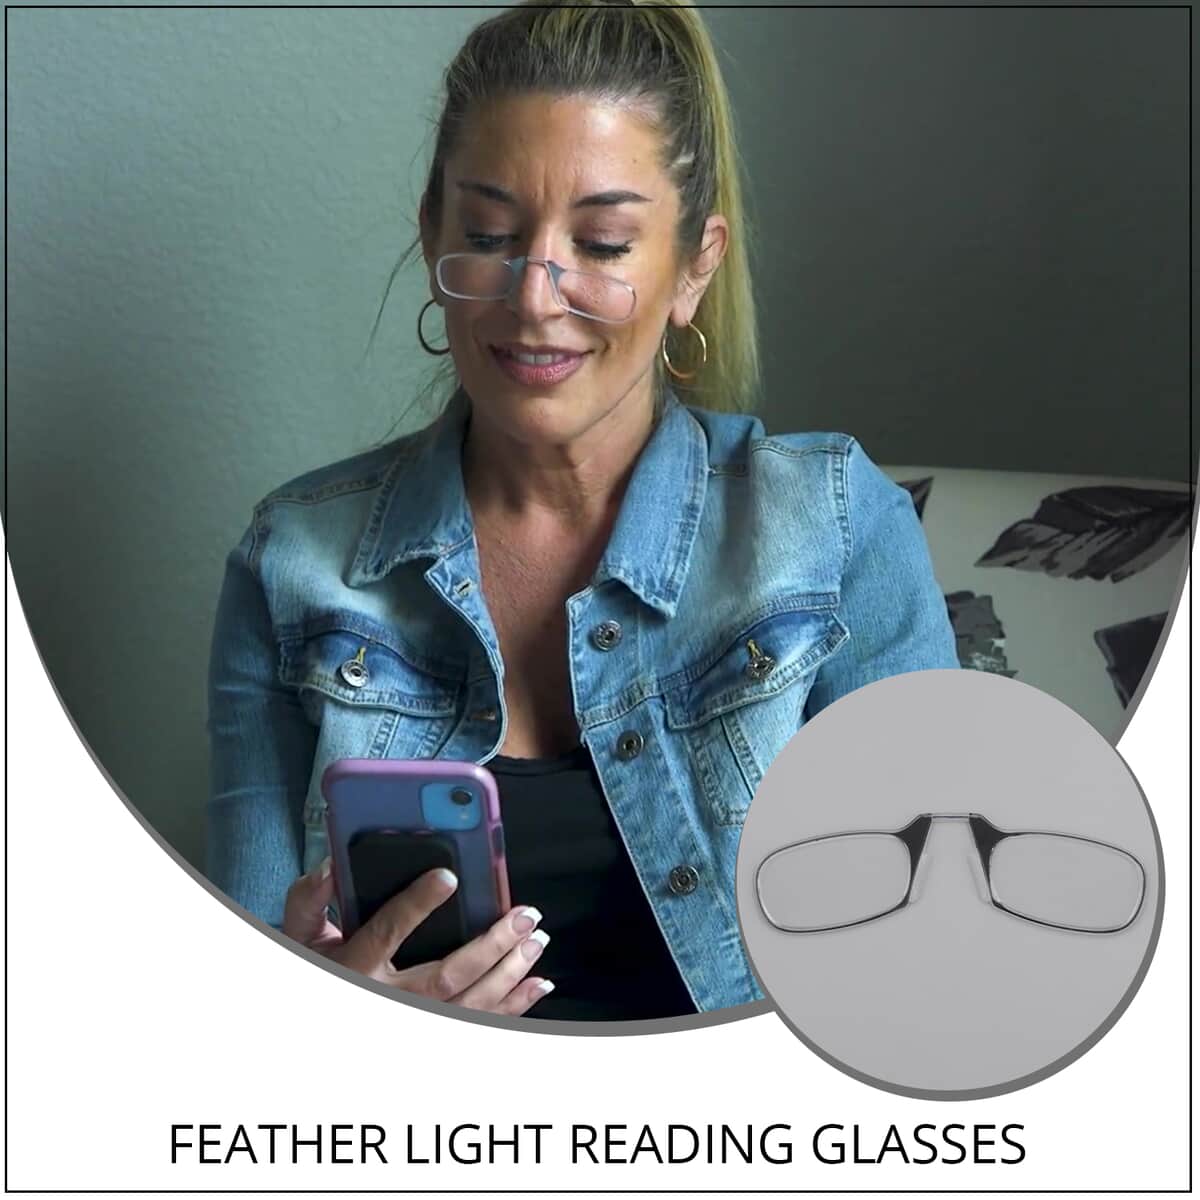 Feather Light Reading Glasses with a Flat Case - Black (Degree 1.0) image number 1